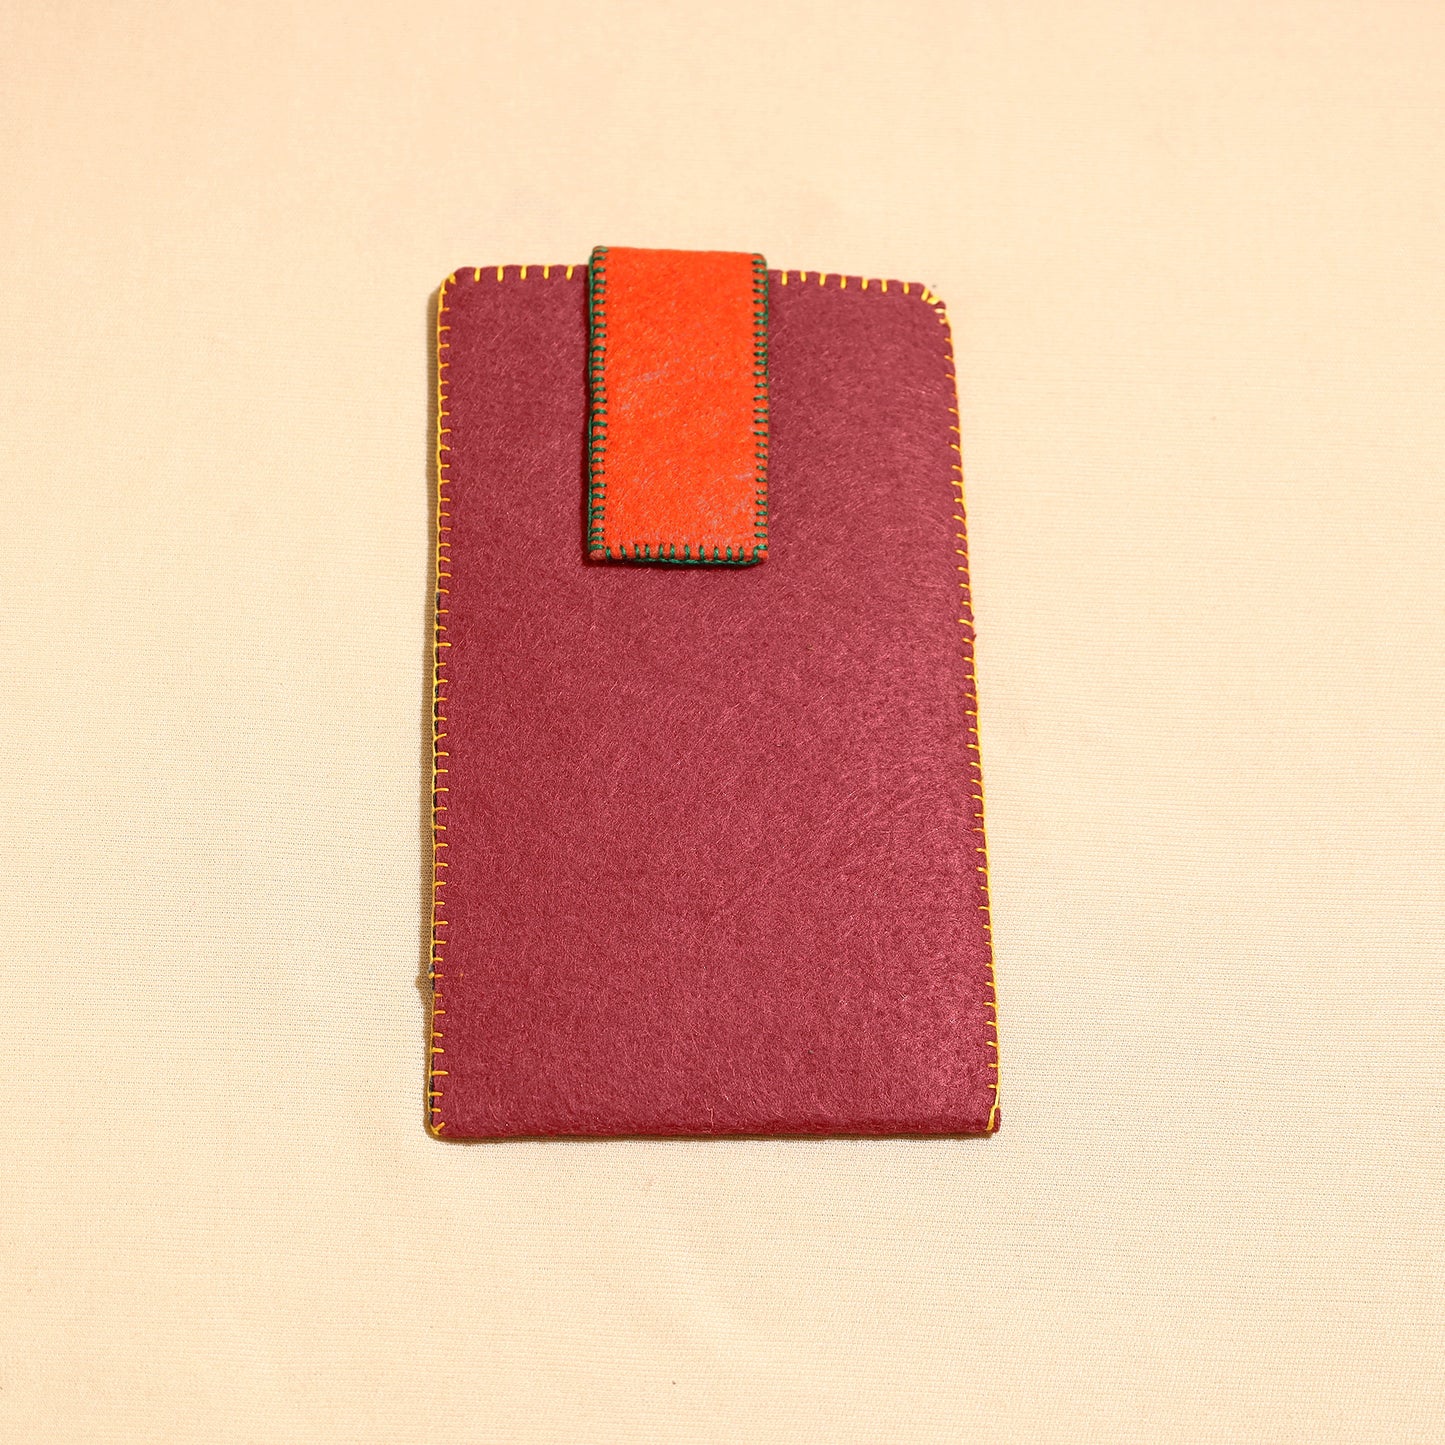 Handcrafted Embroidered Felt Mobile Pouch